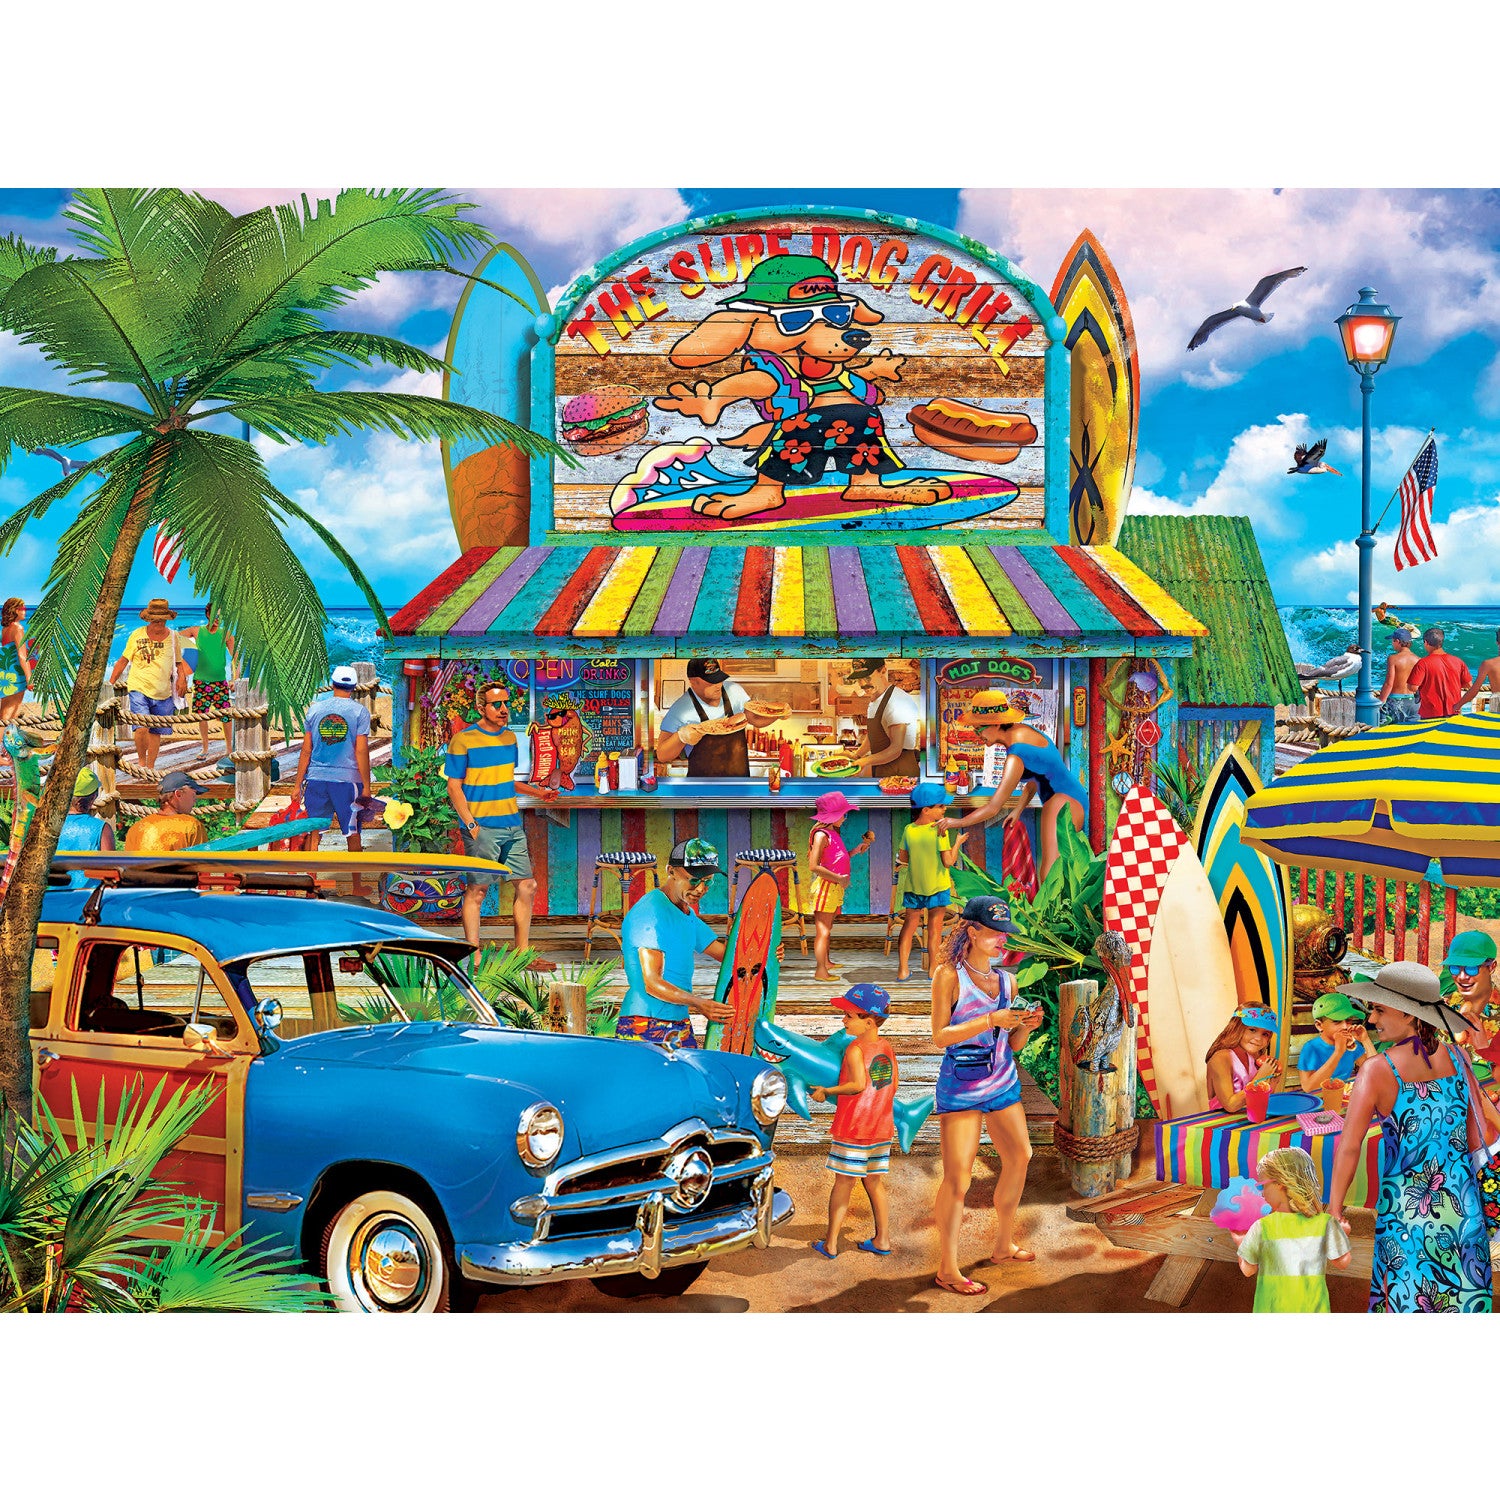 Drive-Ins, Diners & Dives - The Surf Dog Grill 550 Piece Puzzle